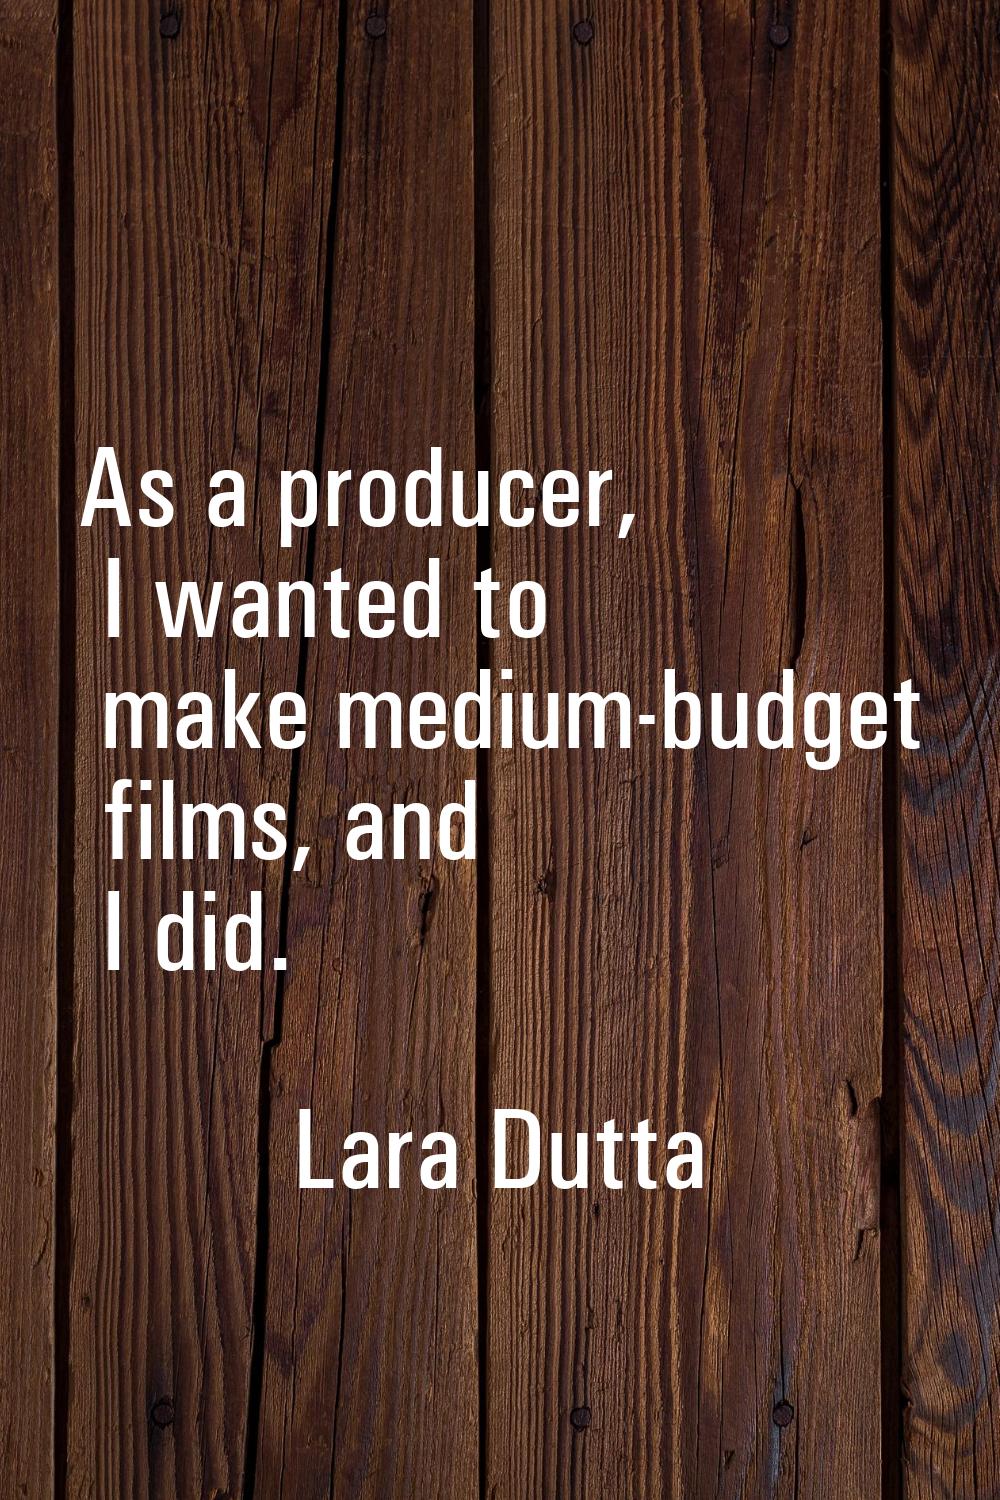 As a producer, I wanted to make medium-budget films, and I did.